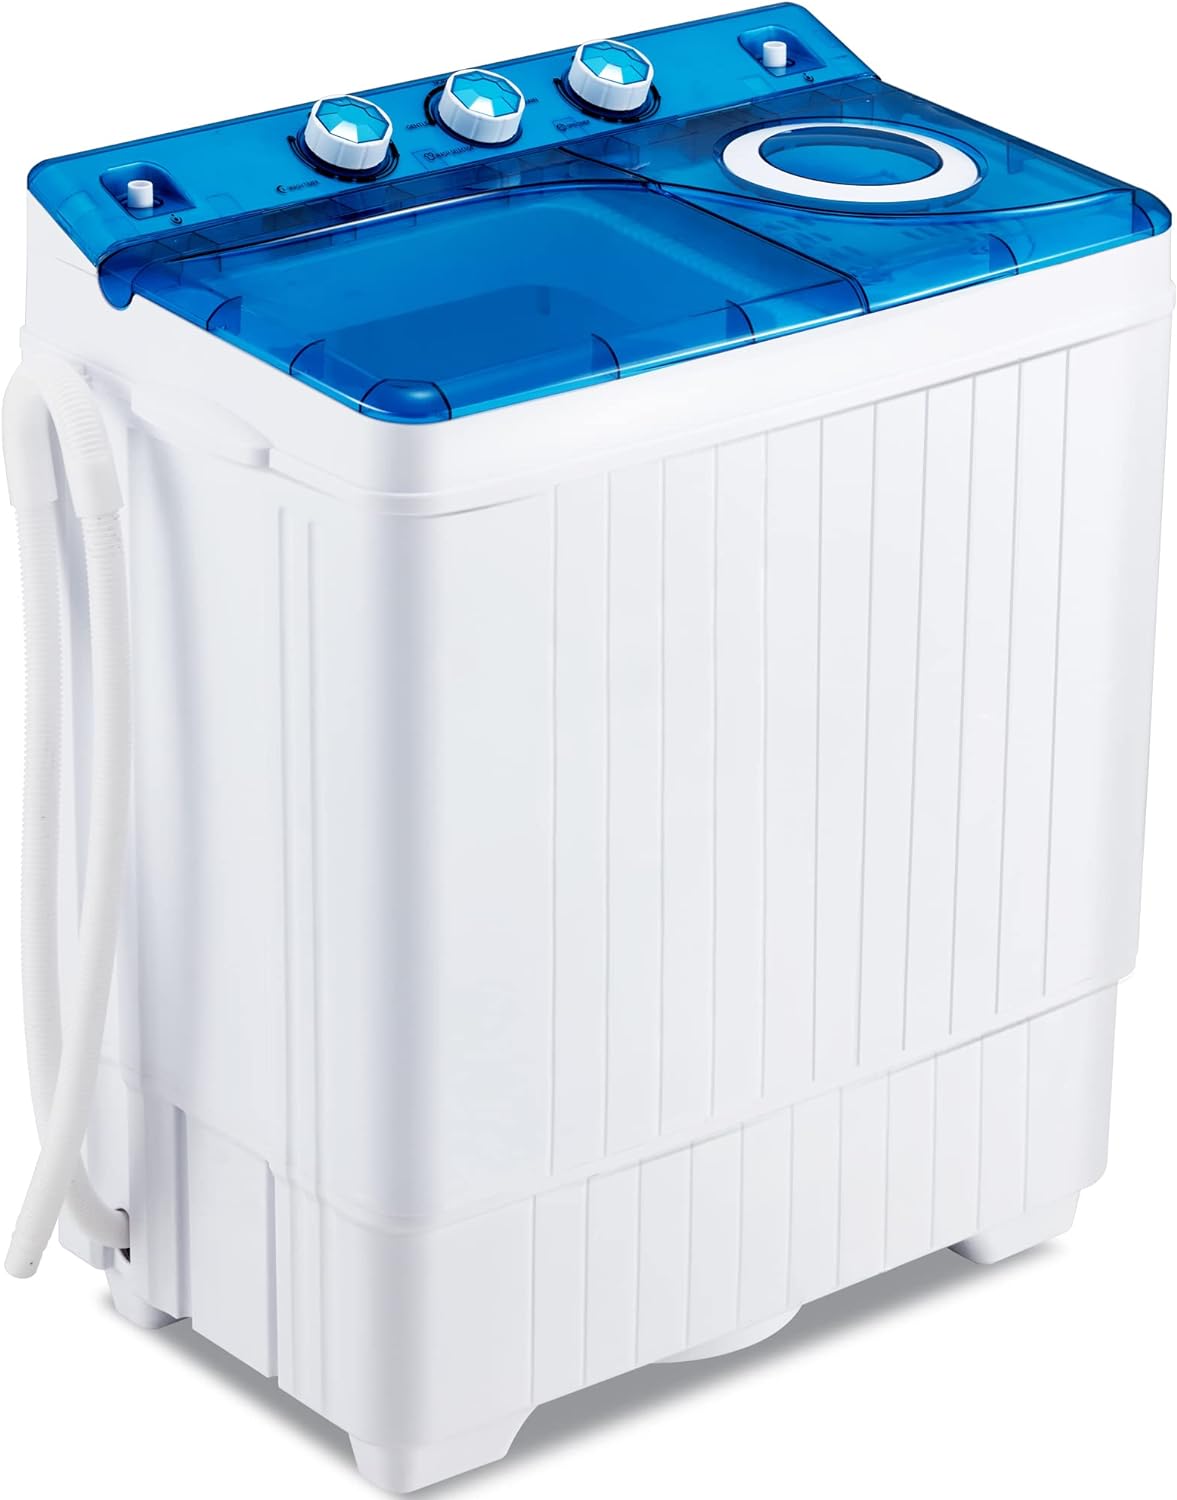 Homguava 26Lbs Capacity Portable Washing Machine Washer and Dryer Combo Twin Tub Laundry 2 In 1 Washer(18Lbs) & Spinner(8Lbs) Built-in Gravity Drain Pumpfor Apartment,Dorms,RV Camping (blue+white)